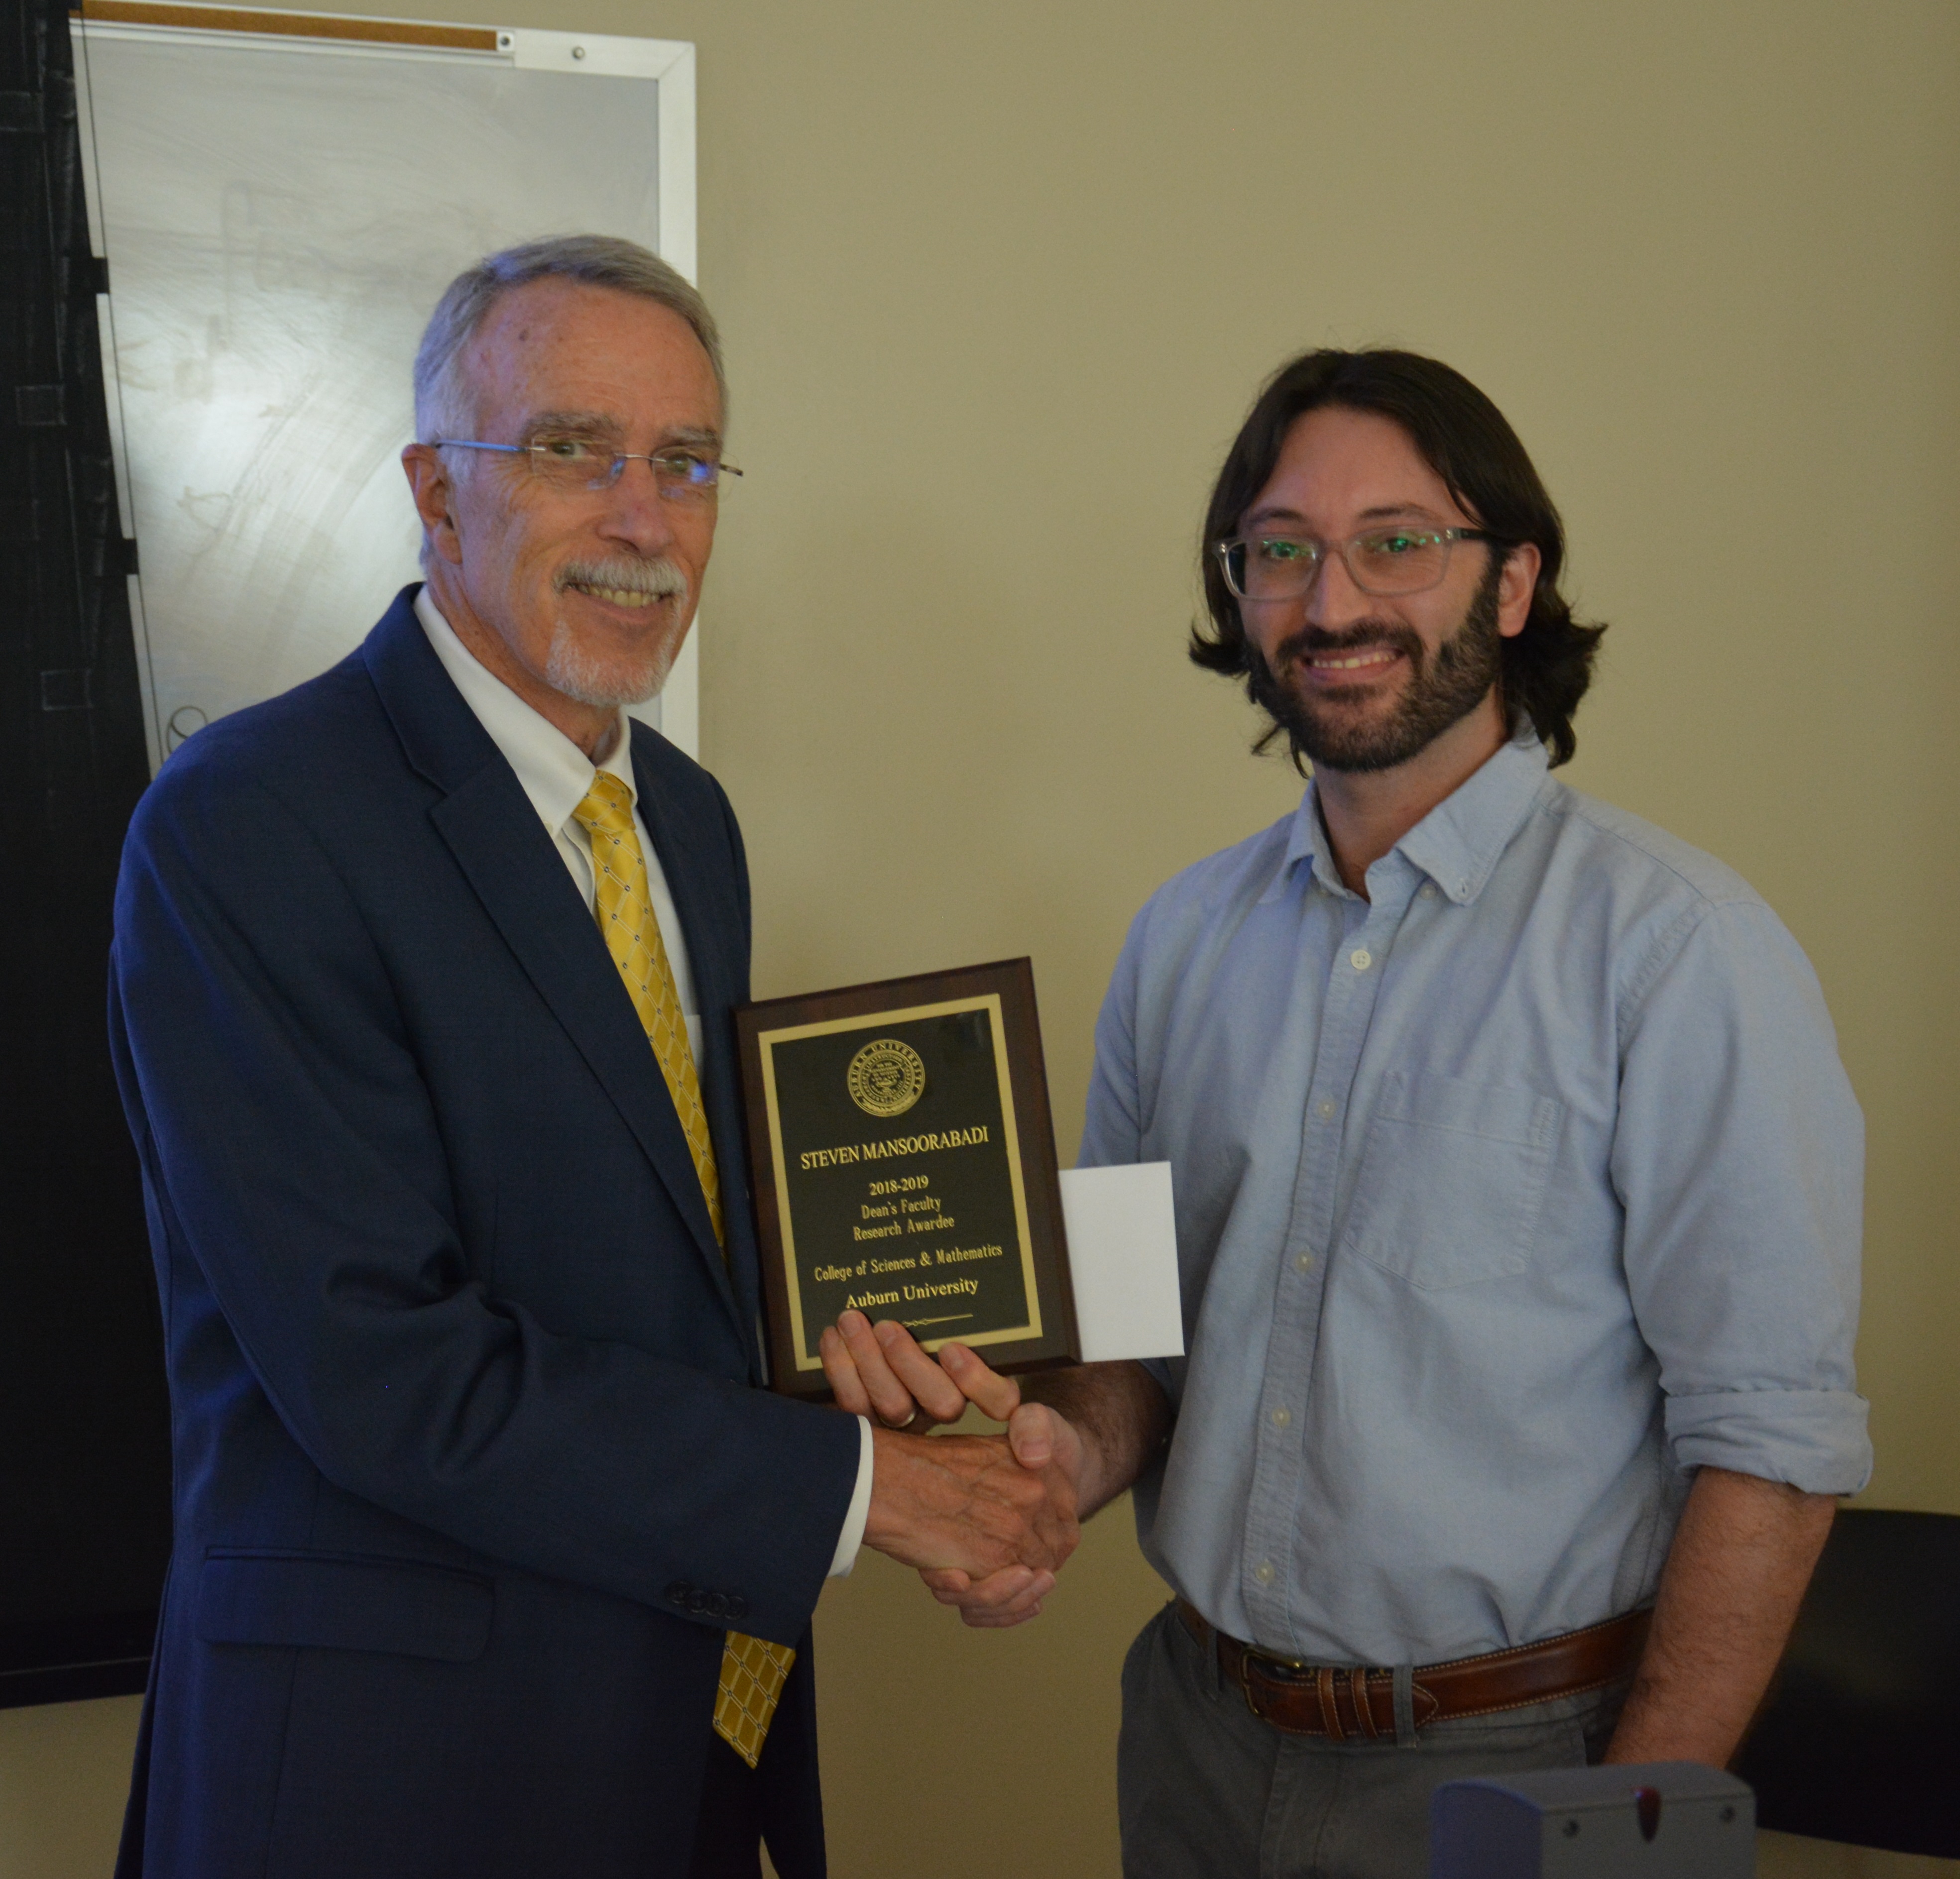 Dean Giordano with Dr. Steven Mansoorabadi at the Dean's Research Awards program.